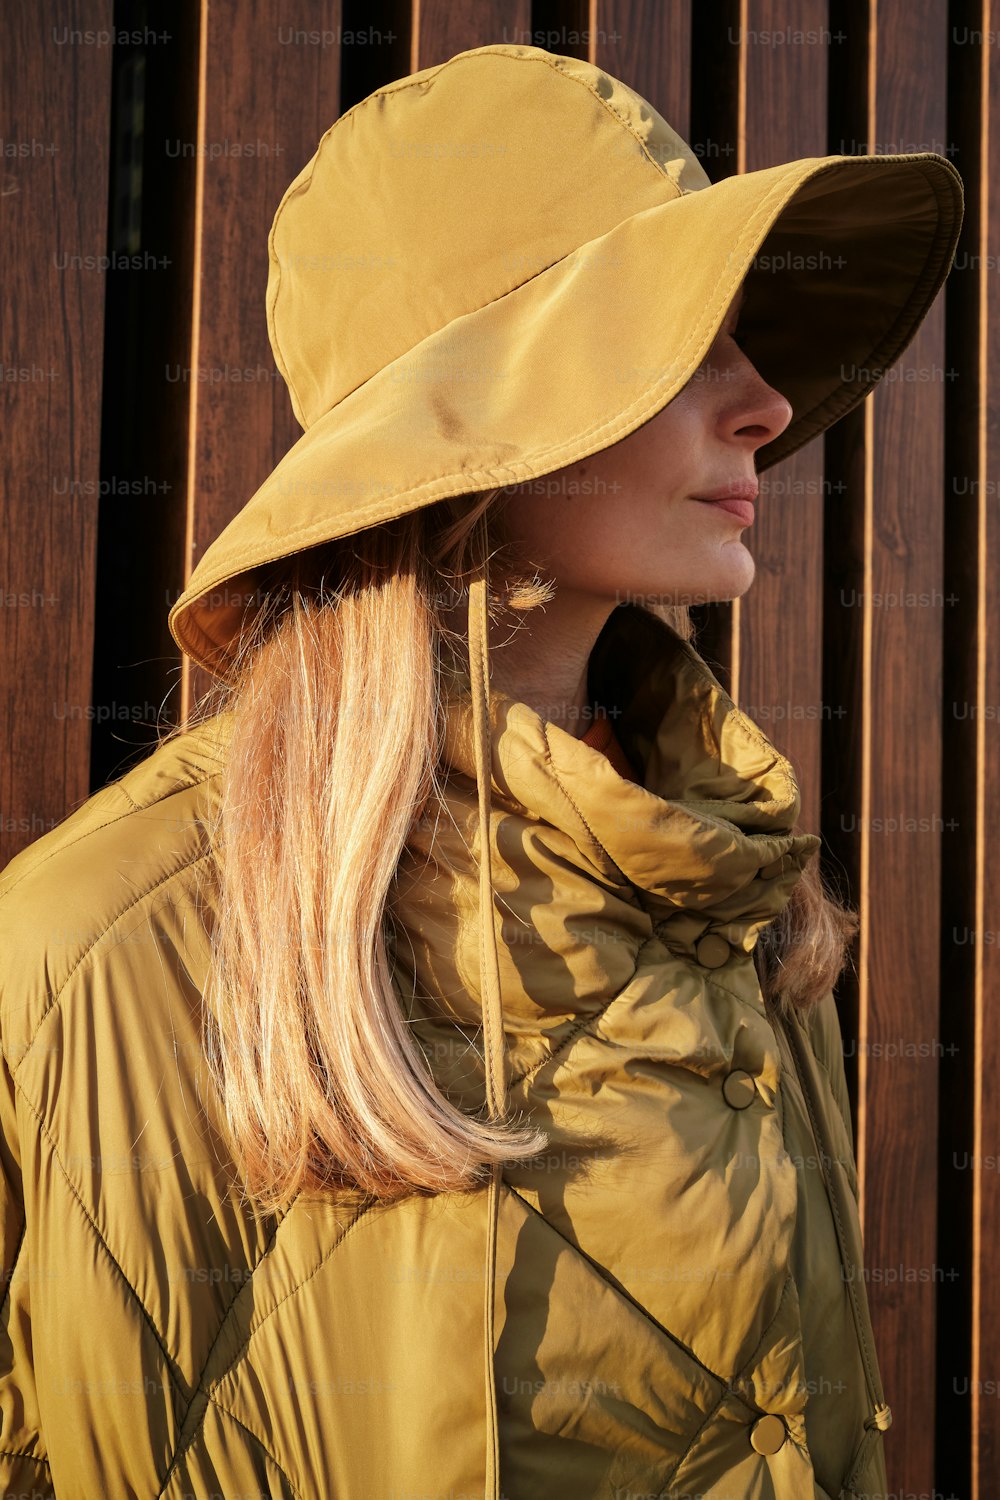 a woman wearing a yellow hat and jacket